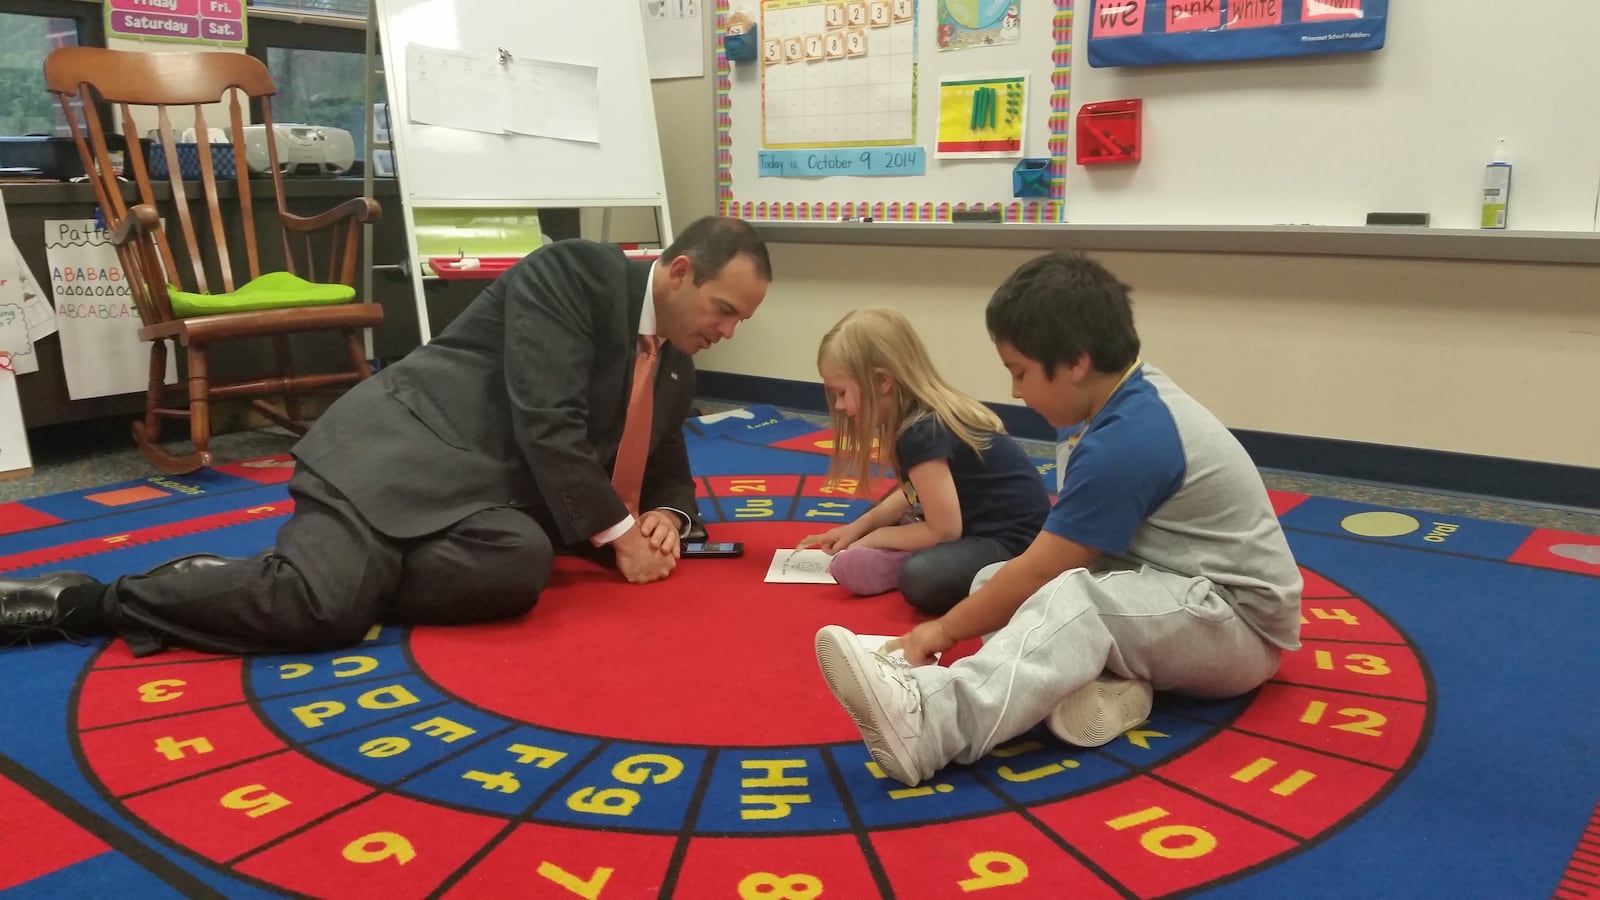 Wayne Township Superintendent Jeff Butts visits with students at Chapel Glen Elementary School in Indianapolis.